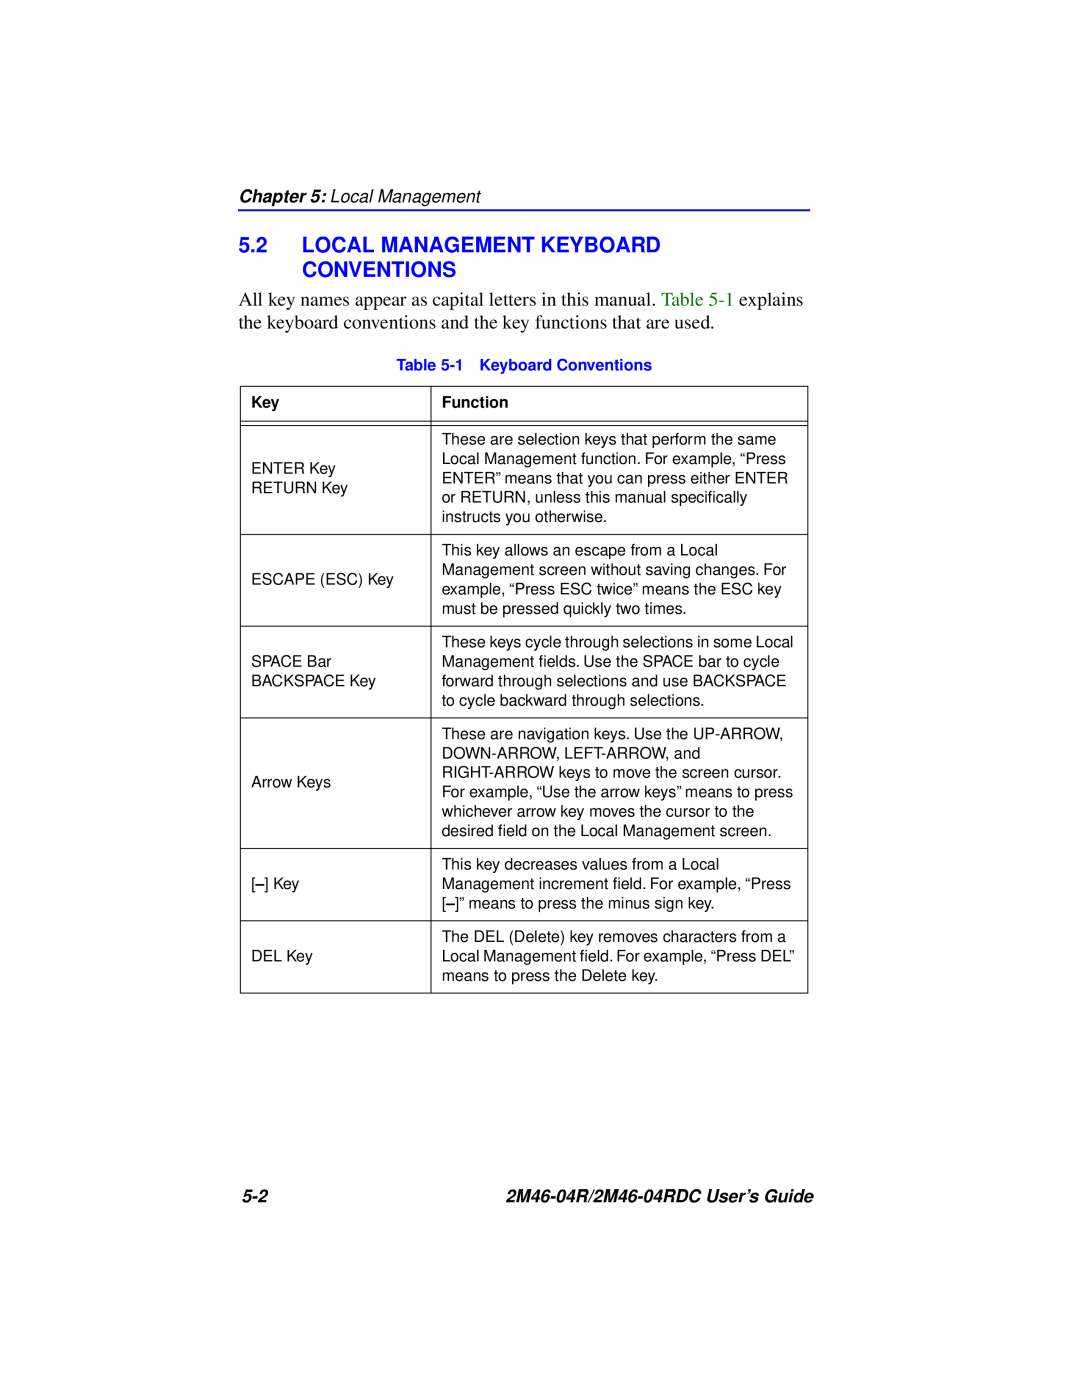 Cabletron Systems pmn Local Management Keyboard Conventions, 2M46-04R/2M46-04RDC User’s Guide, 1 Keyboard Conventions 